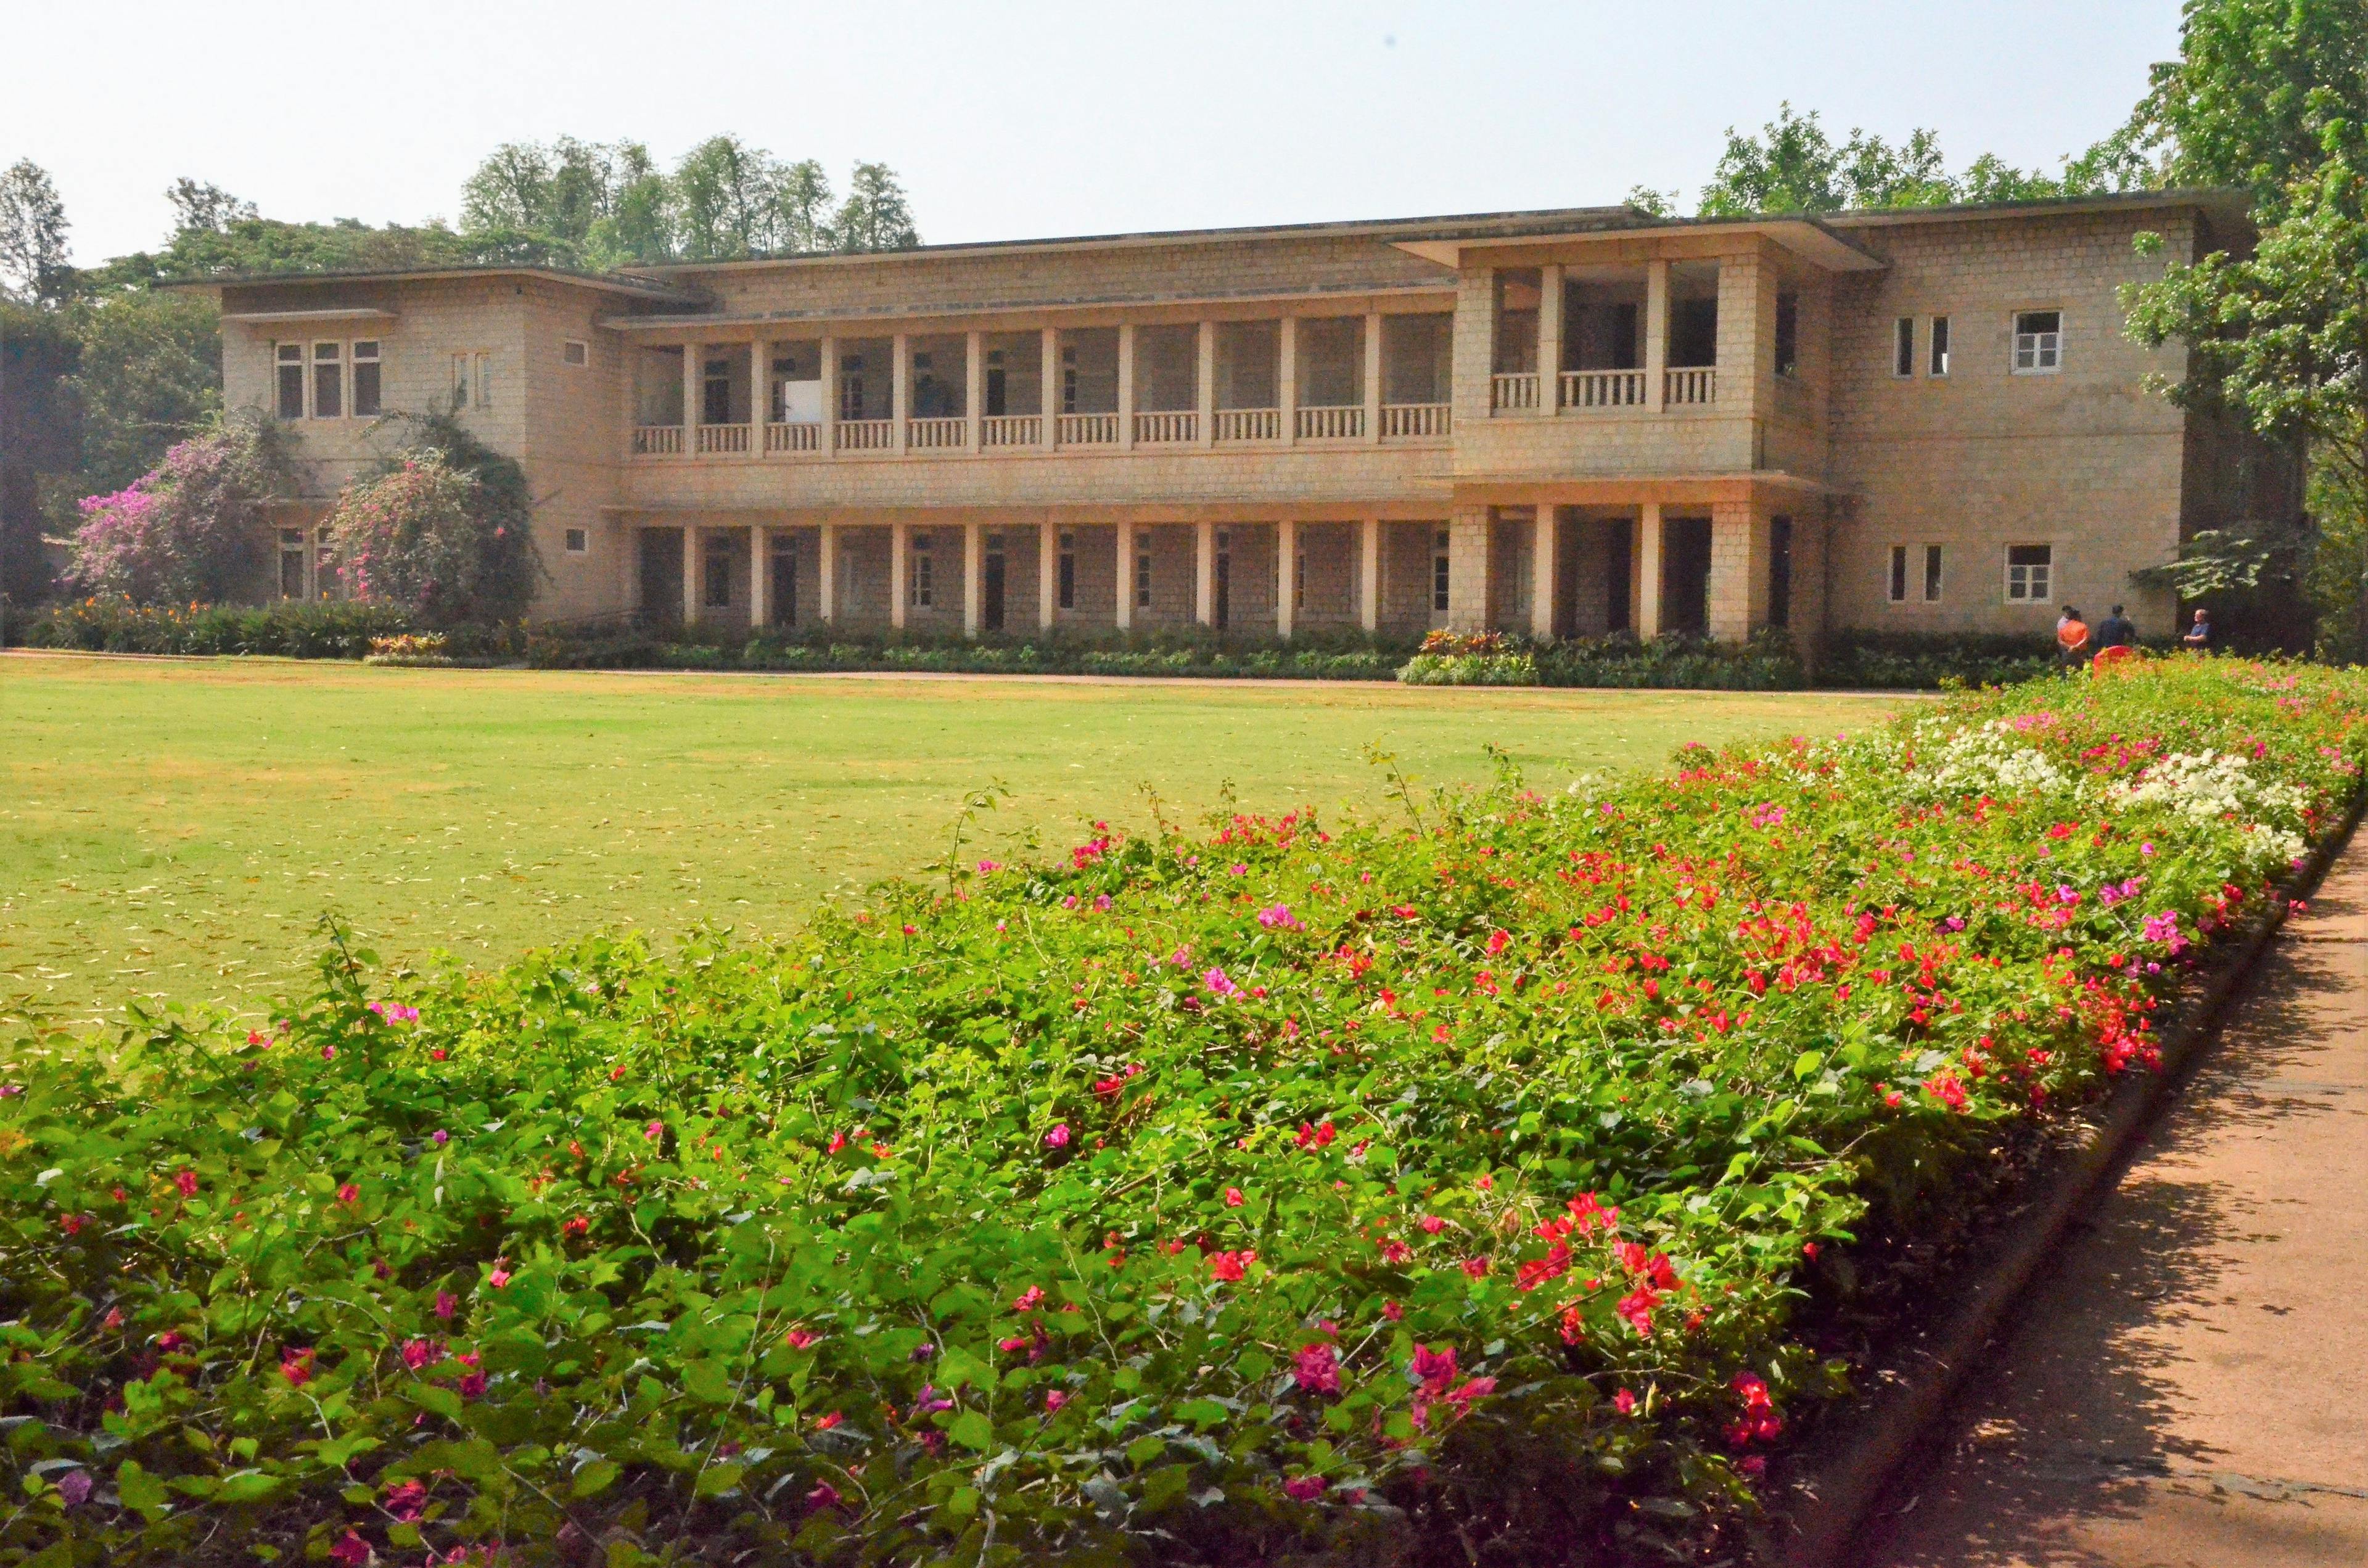 Main building of RRI built and designed by Sir C.V. Raman (from first floor portico he could view Nandi Hills) 